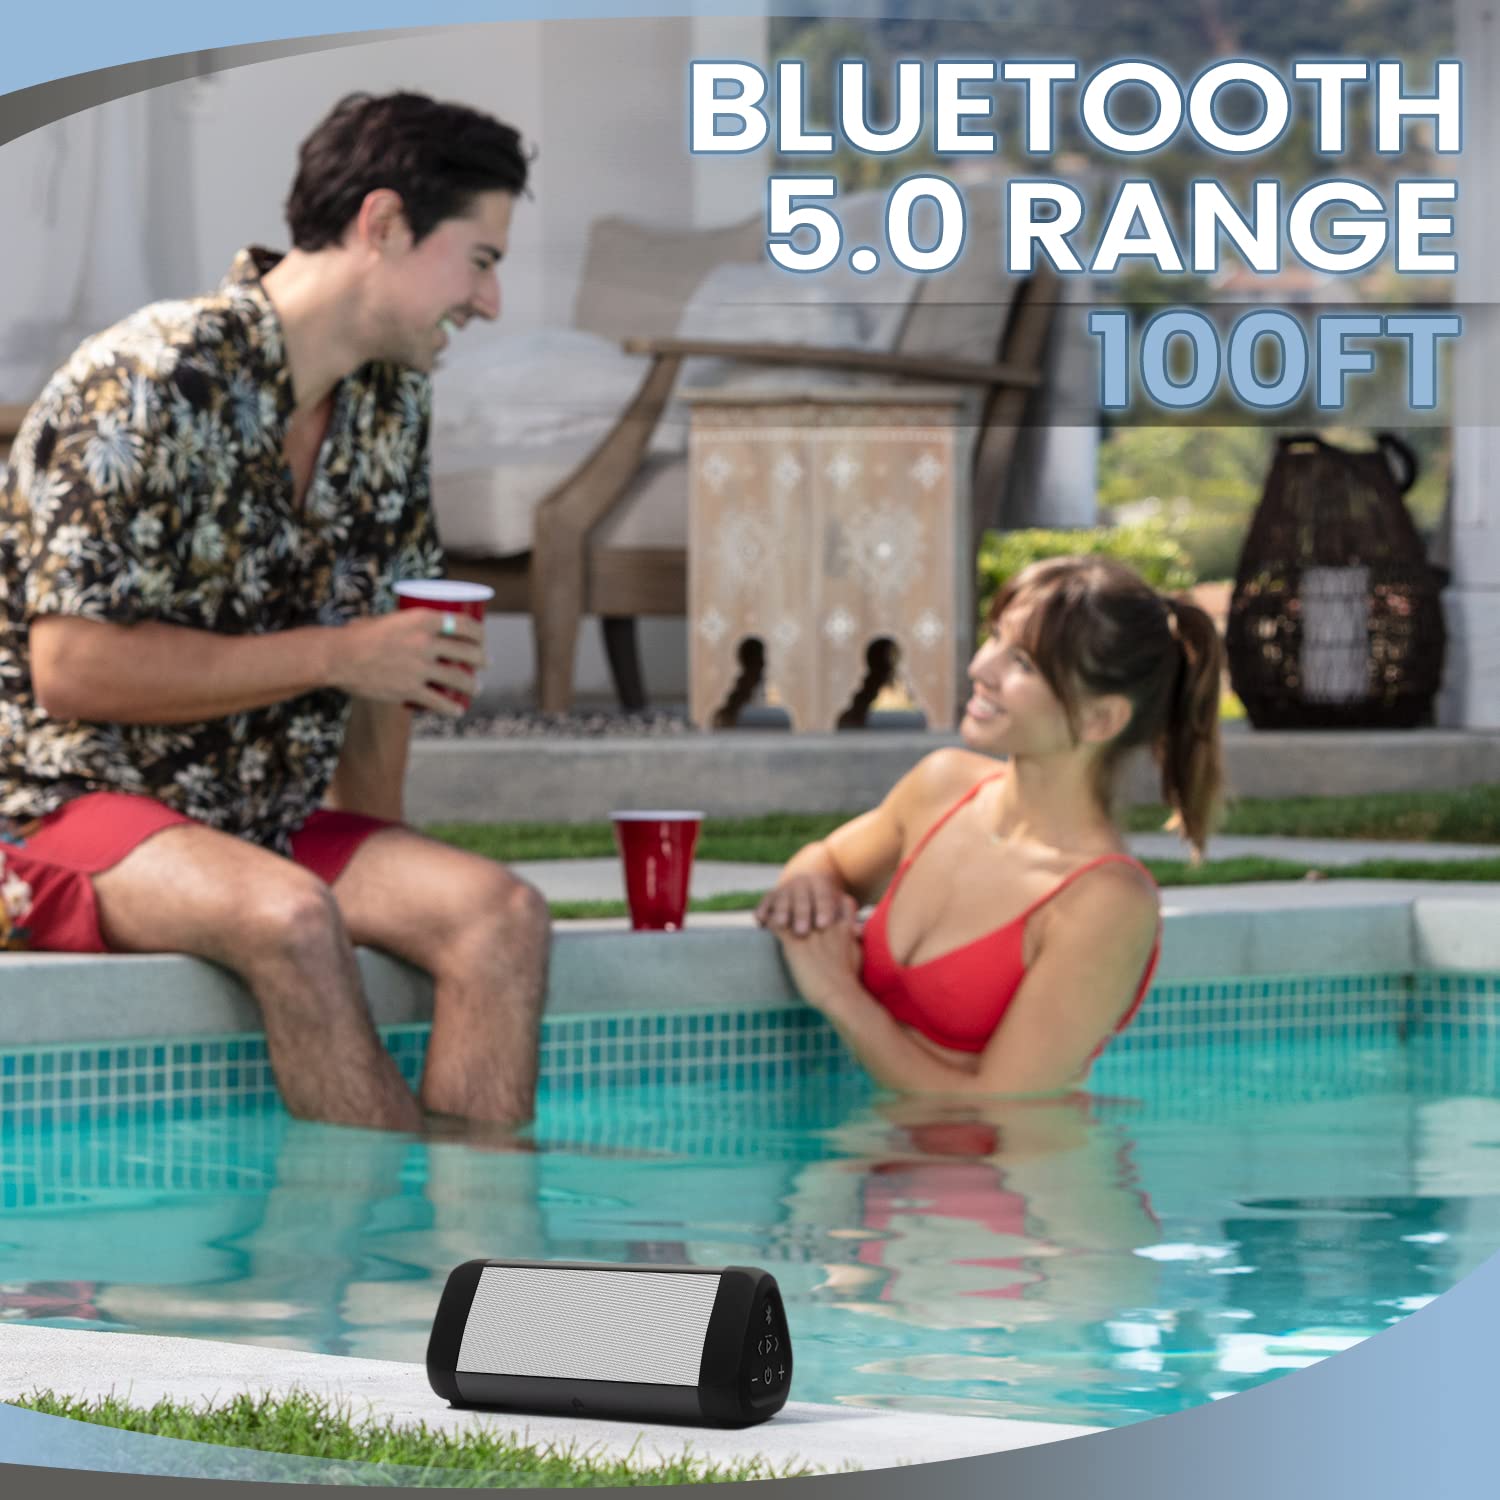 OontZ by CAMBRIDGE SOUNDWORKS Angle 3Ultra (4th Gen) Waterproof 5.0 Bluetooth Speaker, 14Watts, Hi-Quality Sound & Bass, 100Ft Wireless Range, Play 2, 3 or More Speakers Together, OontZ App (White)